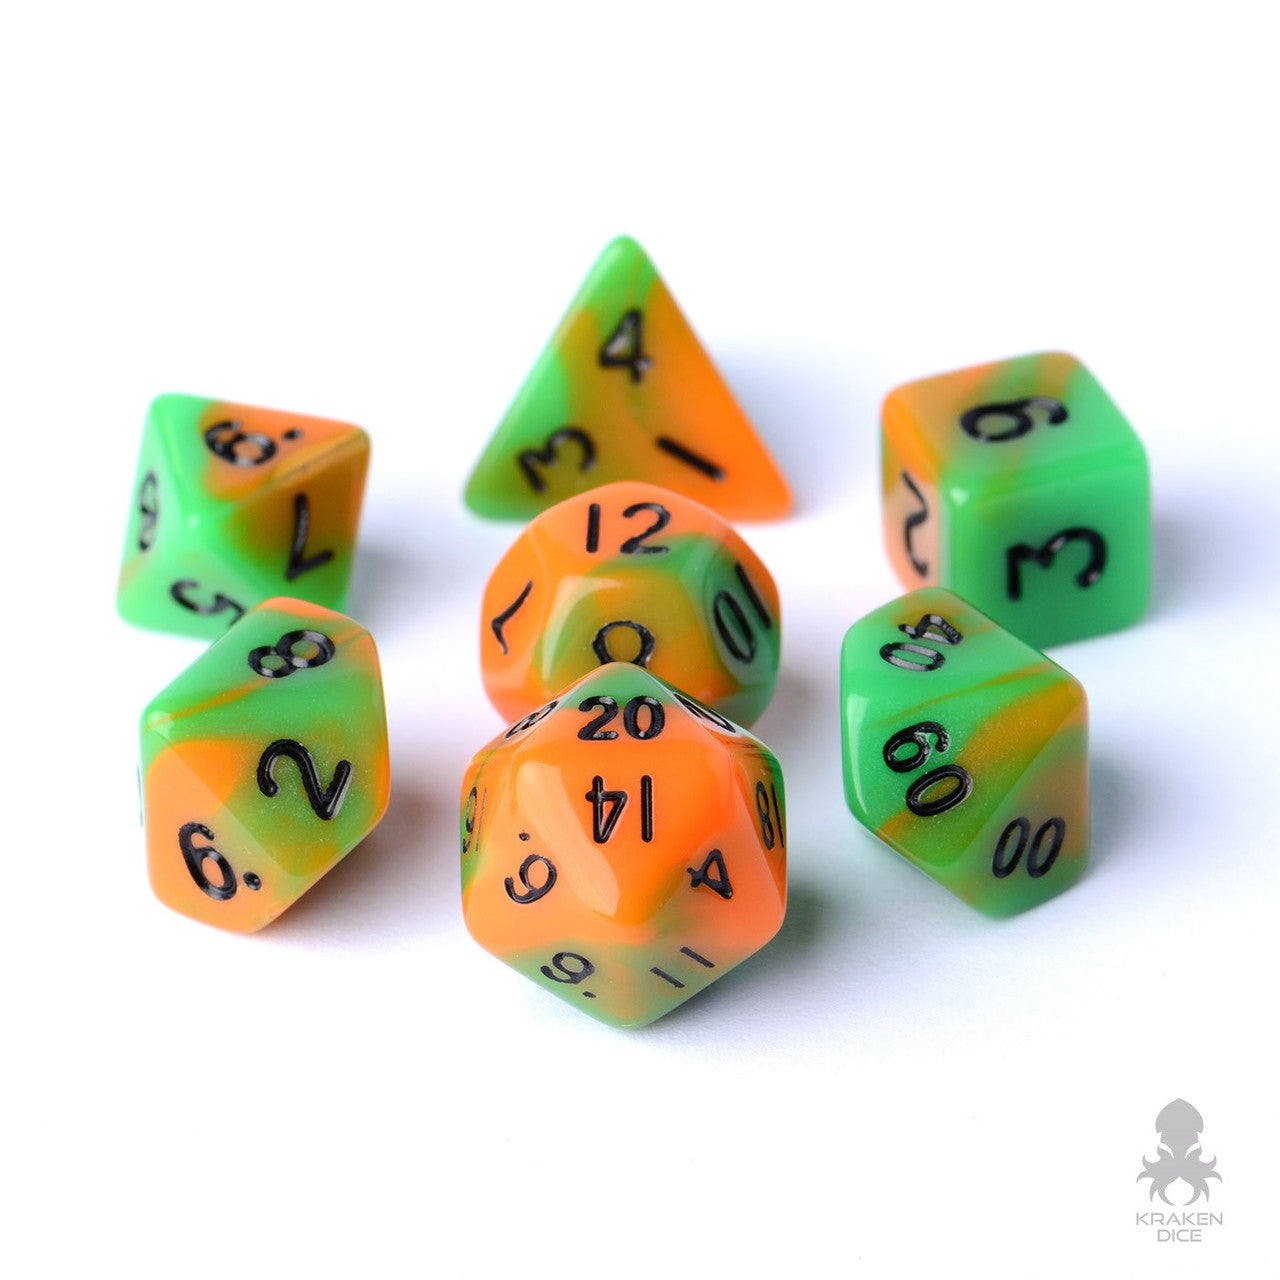 10mm Green and Orange Blended 7pc Mini Polyhedral Dice Set